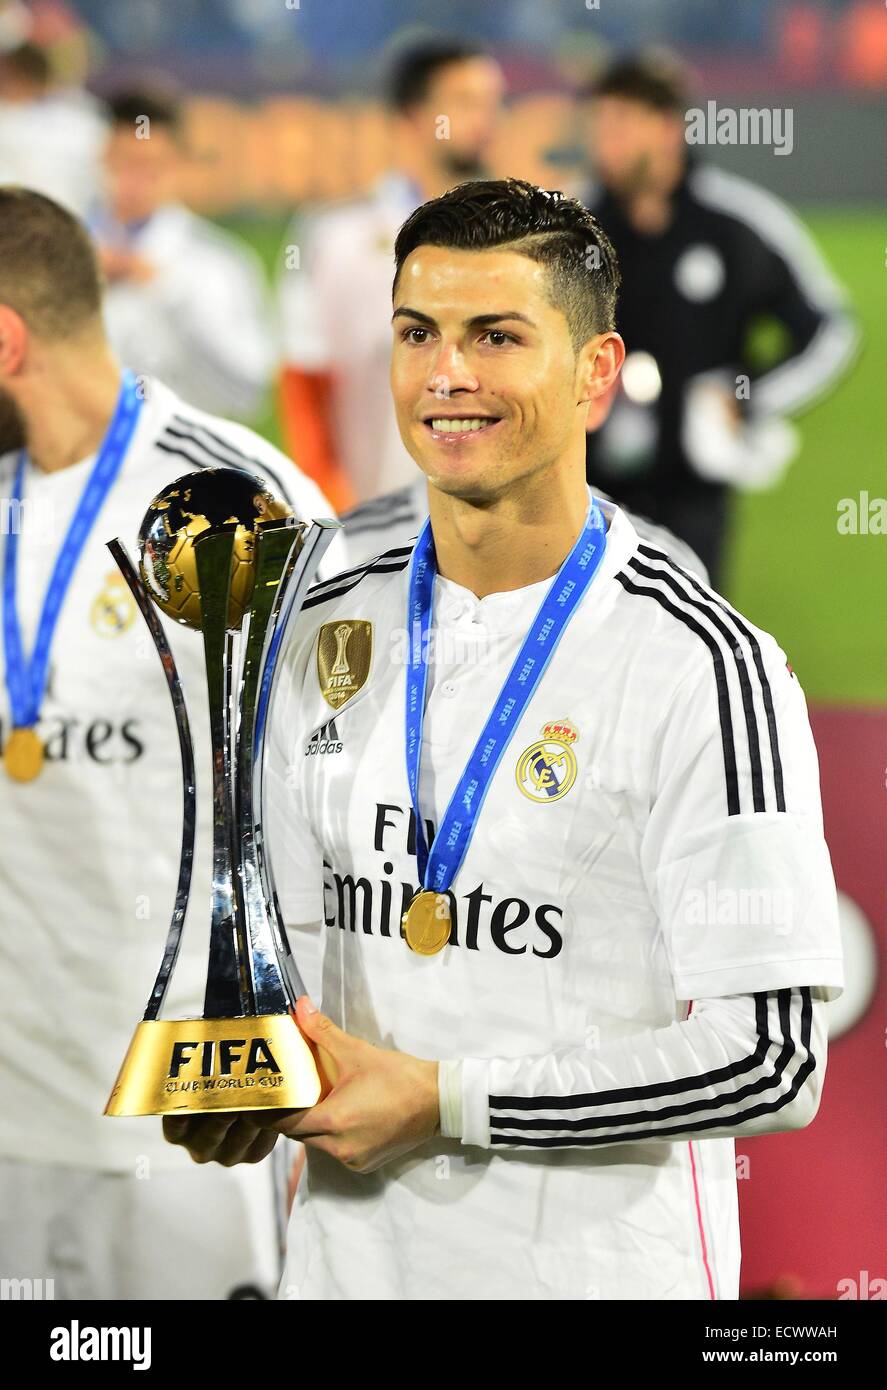 Marrakech, Morocco. 20th Dec, 2014. Real Madrid forward CRISTIANO RONALDO celebrating with the trophy after win the FIFA Club World Cup 2014 in Marrakech. Credit:  Marcio Machado/ZUMA Wire/Alamy Live News Stock Photo